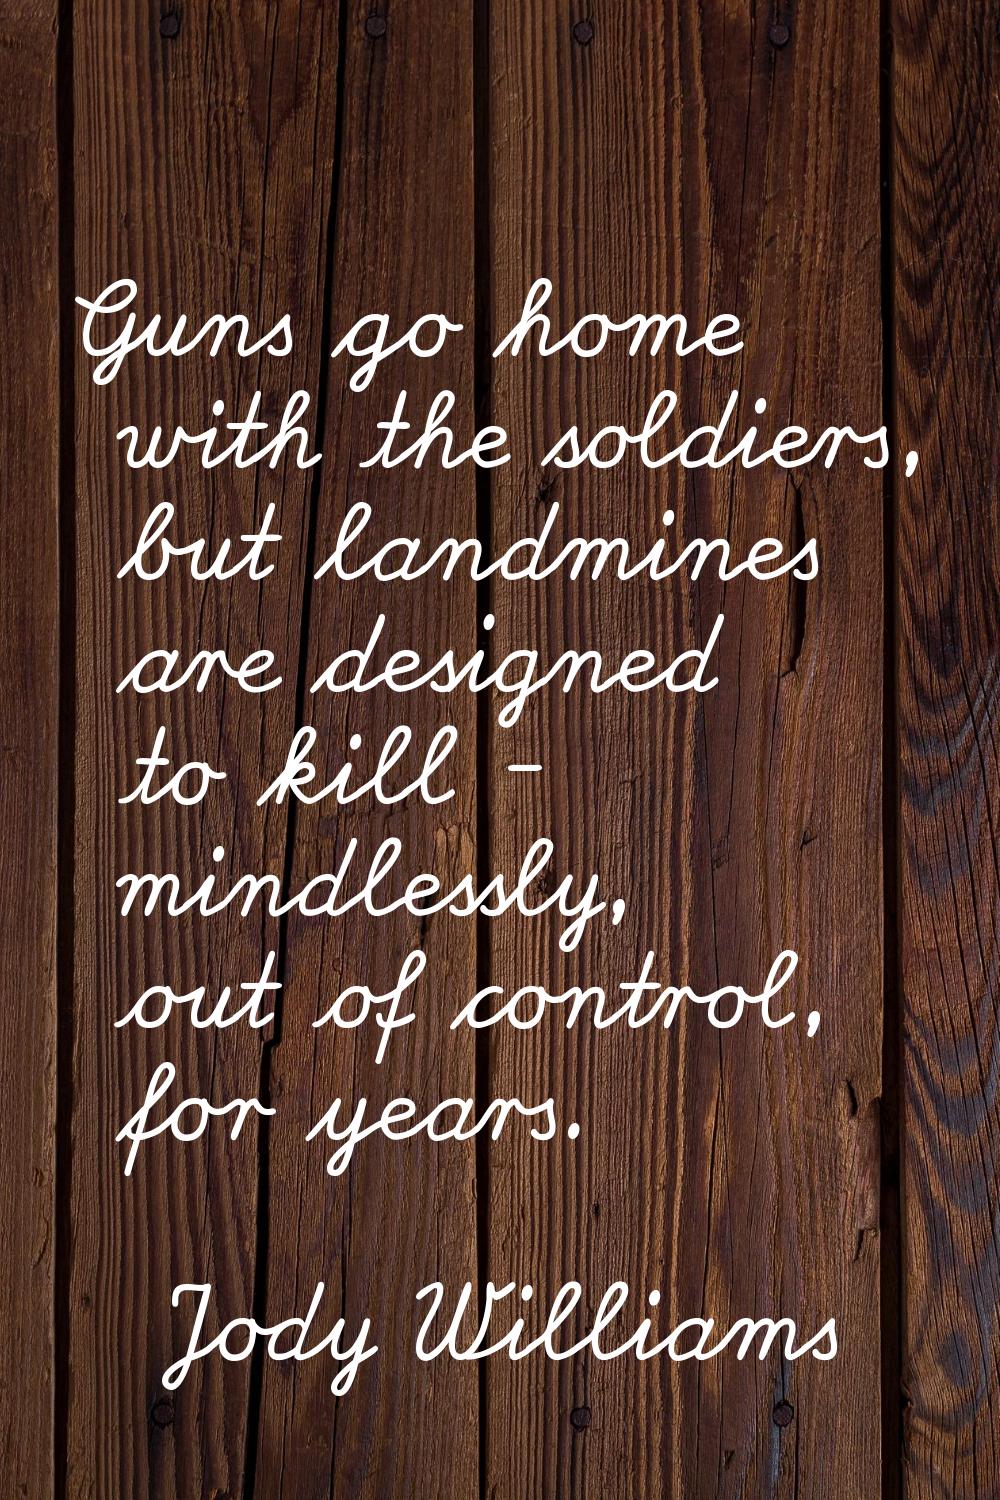 Guns go home with the soldiers, but landmines are designed to kill - mindlessly, out of control, fo